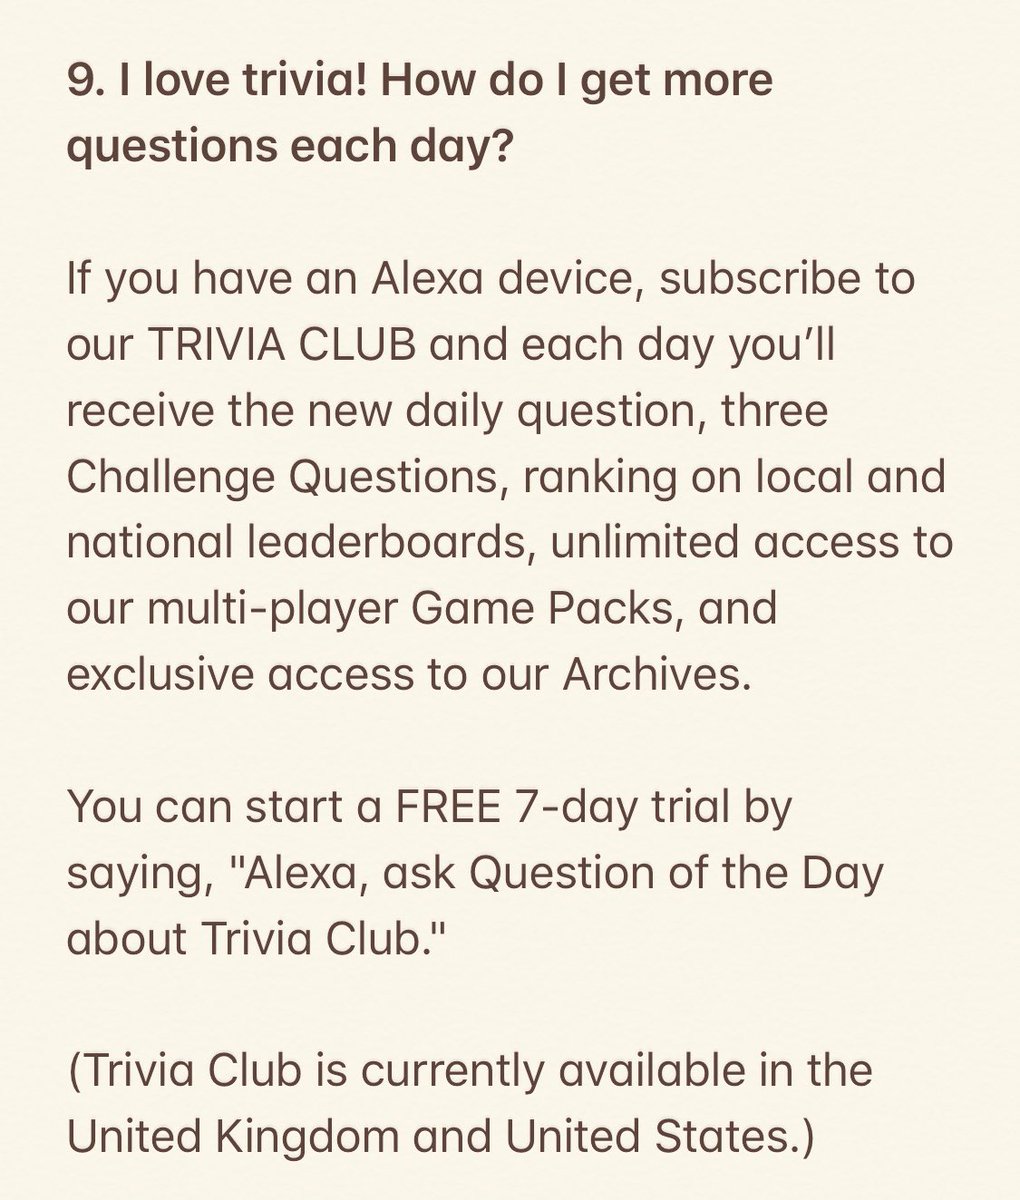 Question Of The Day On Twitter 9 I Love Trivia How Do I Get More Questions Each Day Click On The Image For The Answer Https T Co 12vdzymtlr Twitter